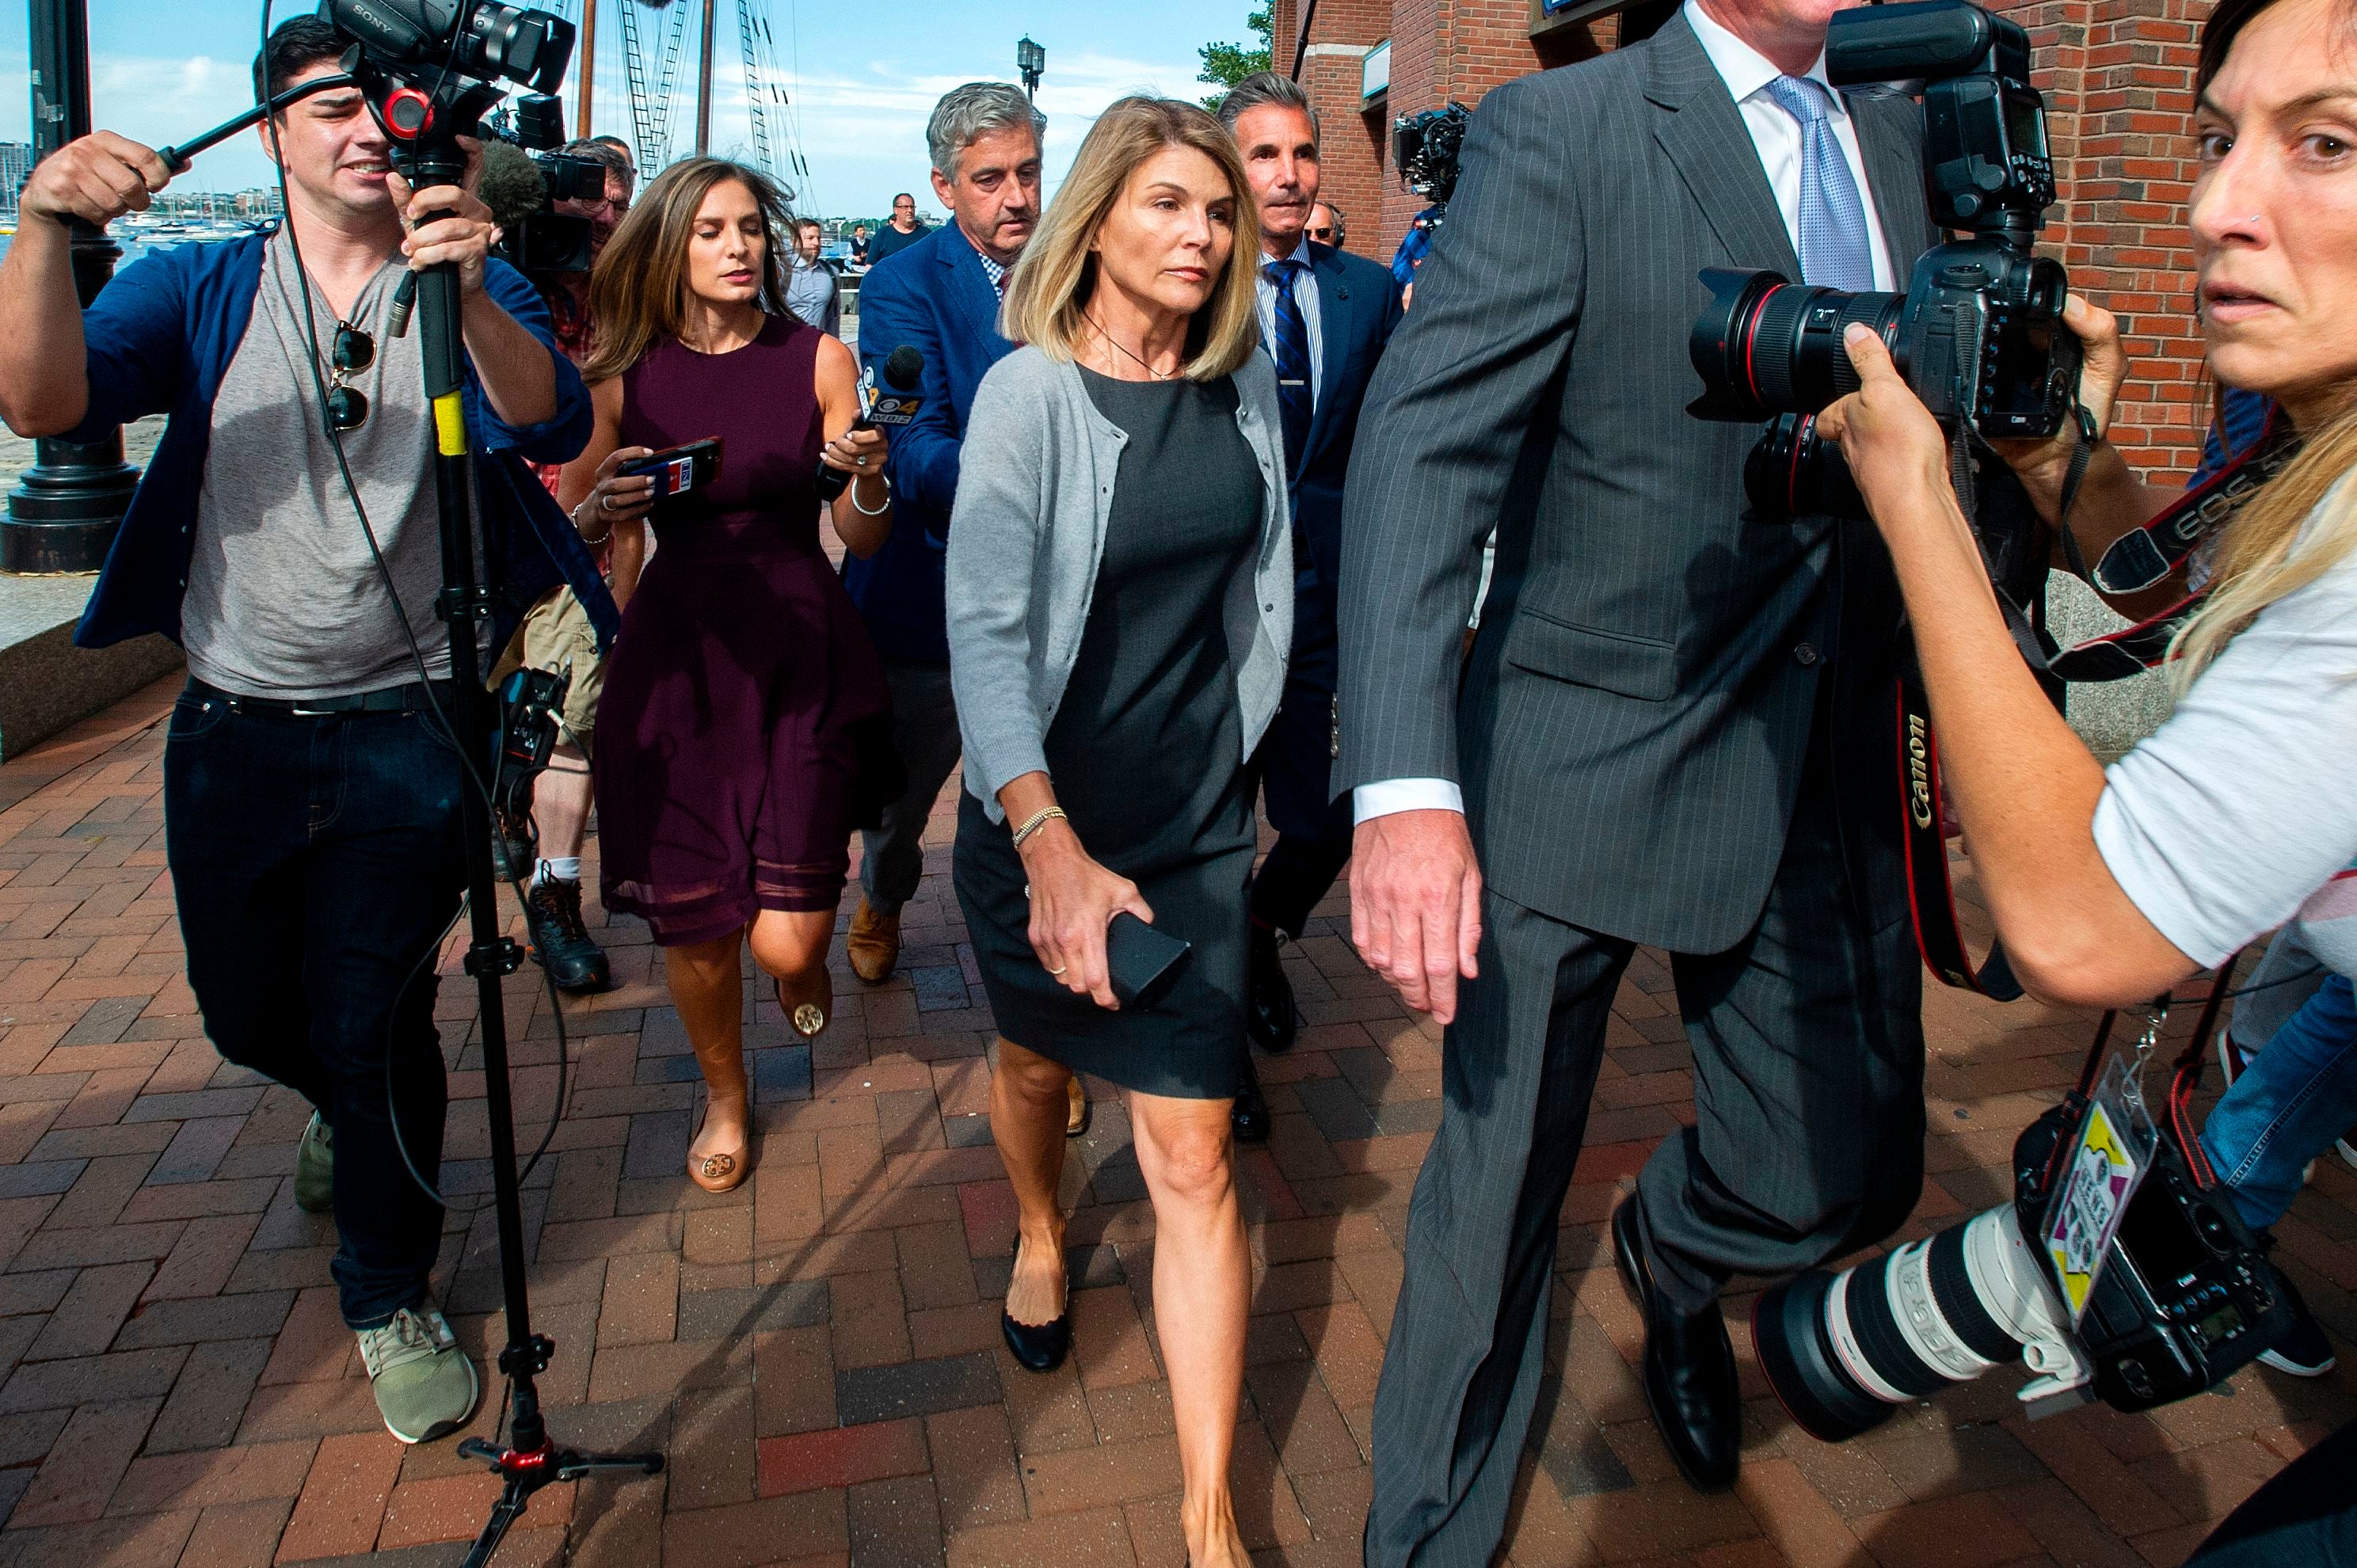 Lori Loughlin was released from prison after serving two-month sentence